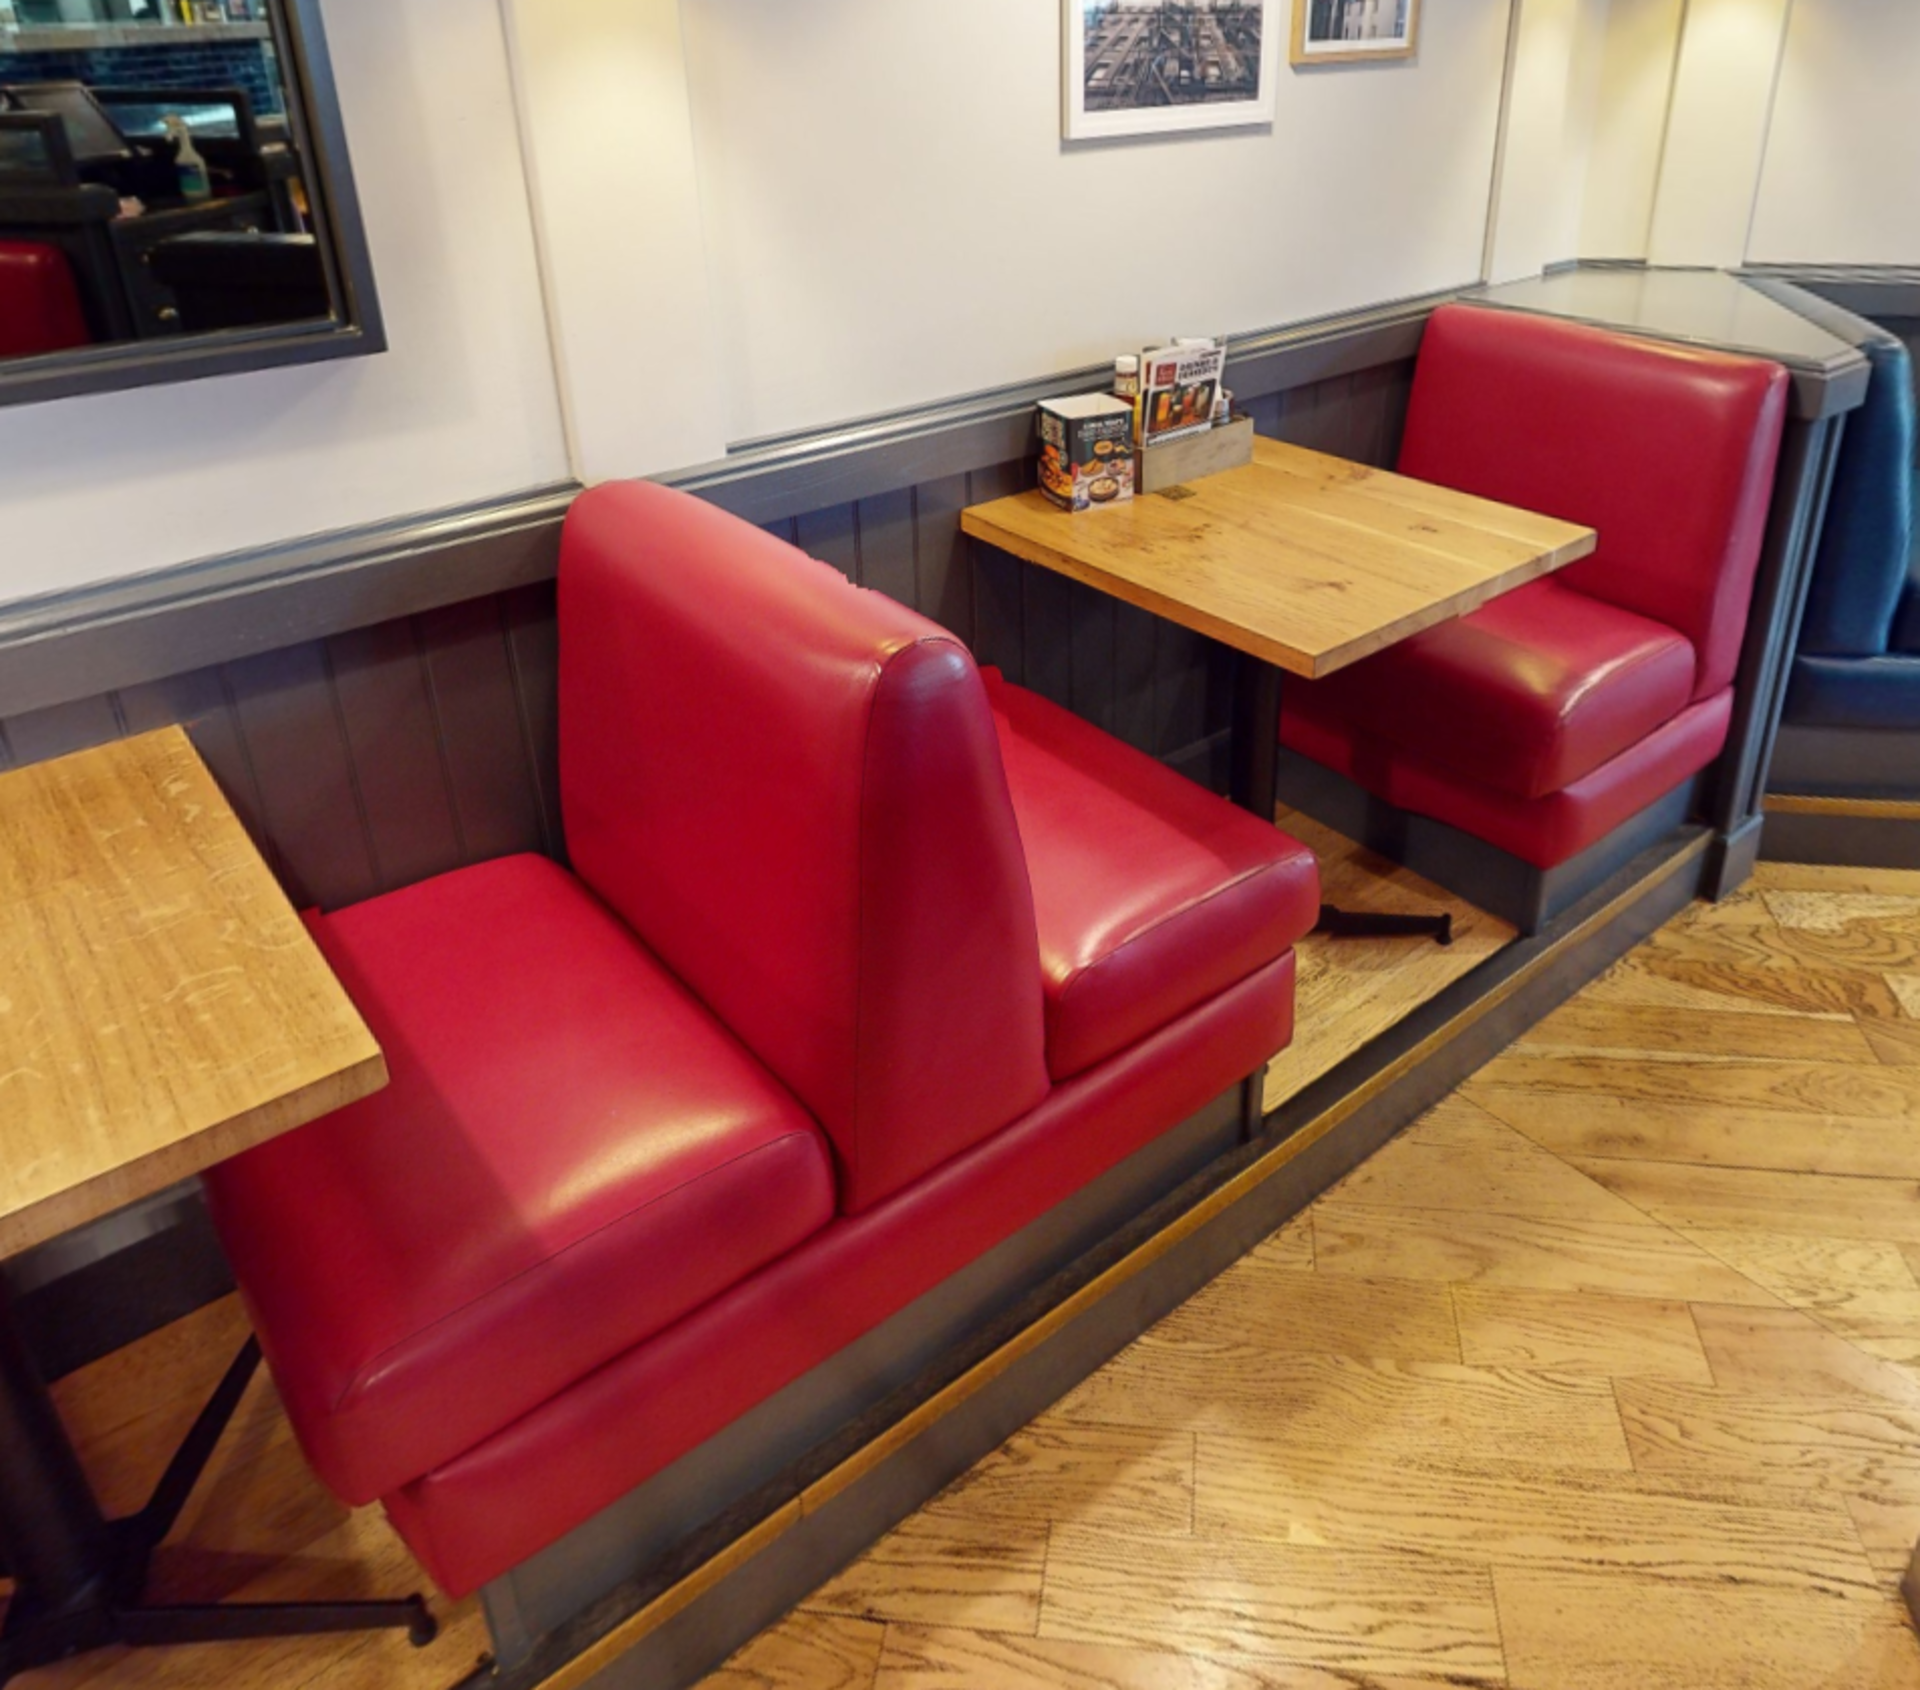 1 x Collection of Restaurant Seating Benches - Single Seat Benches in Red Faux Leather - Image 4 of 5